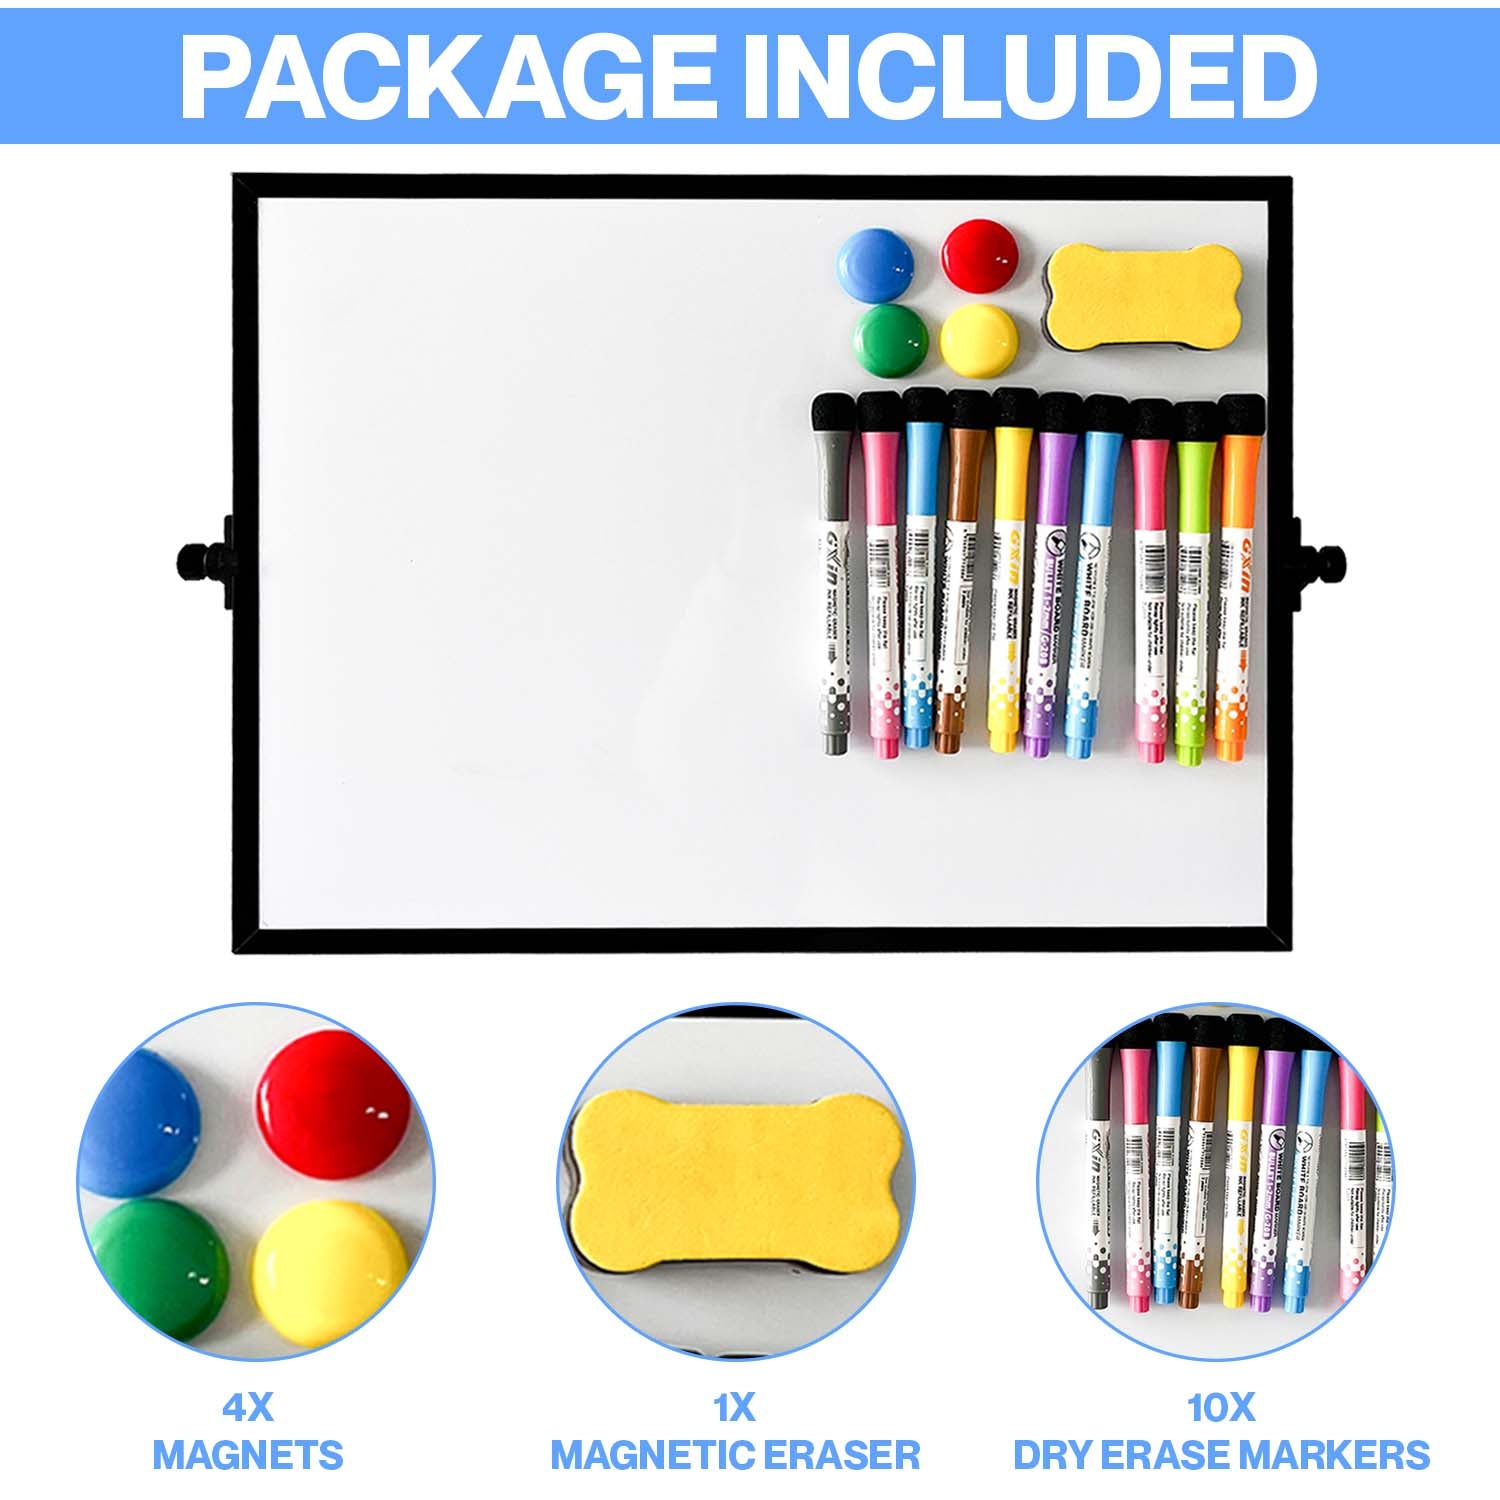 Whiteboard 4-sided, foldable, magnetic, dry erasable